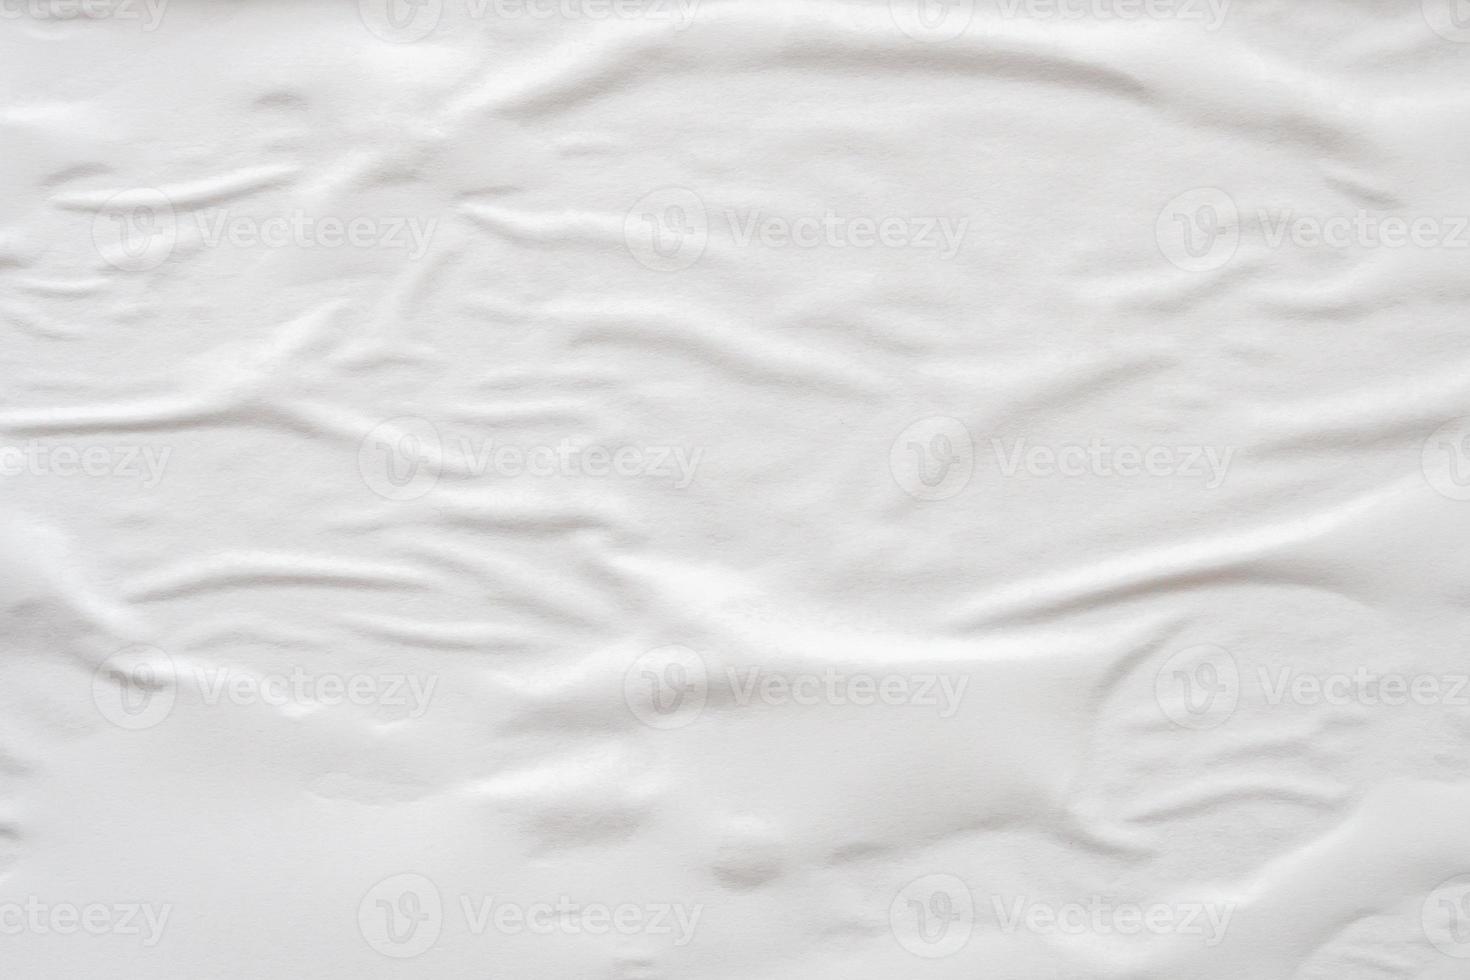 white crumpled and creased paper poster texture background 13019227 ...